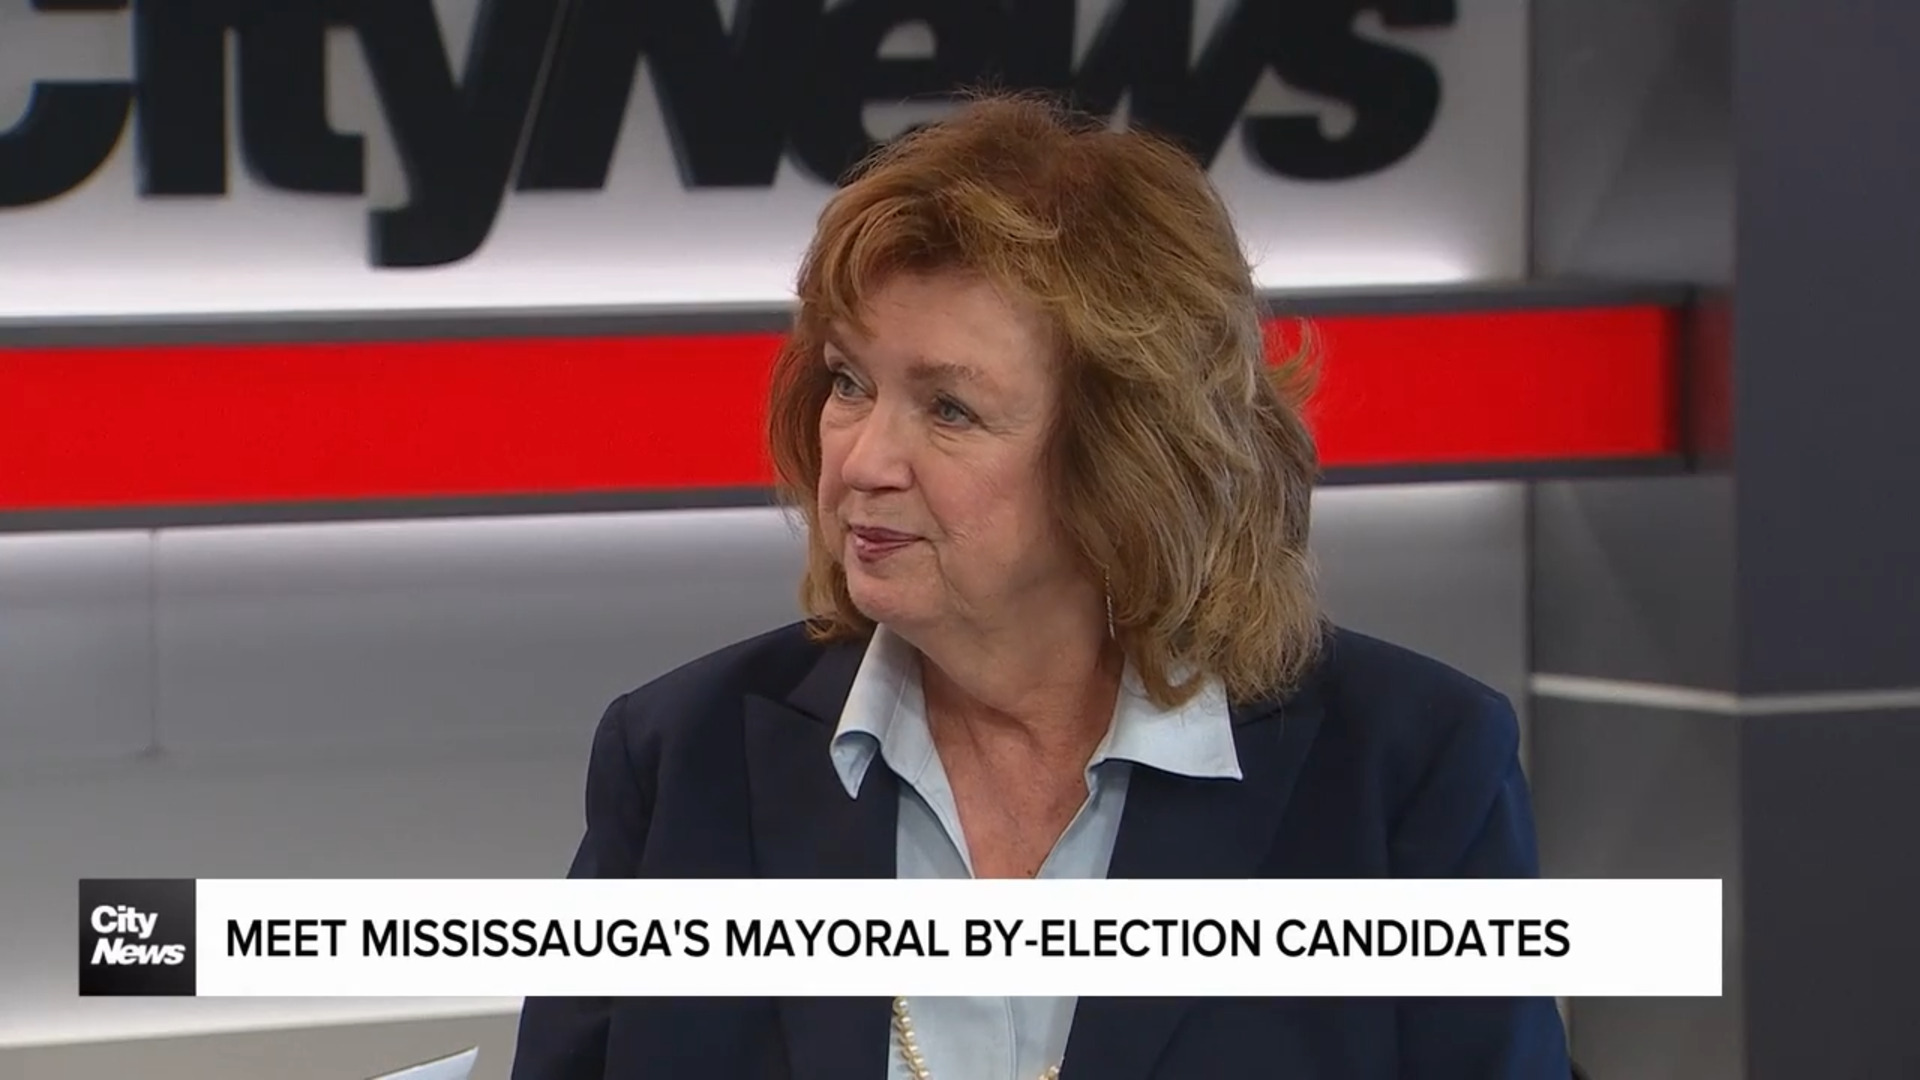 'I produce what I say I'm going to produce,' meet Mississauga Mayoral candidate Carolyn Parrish